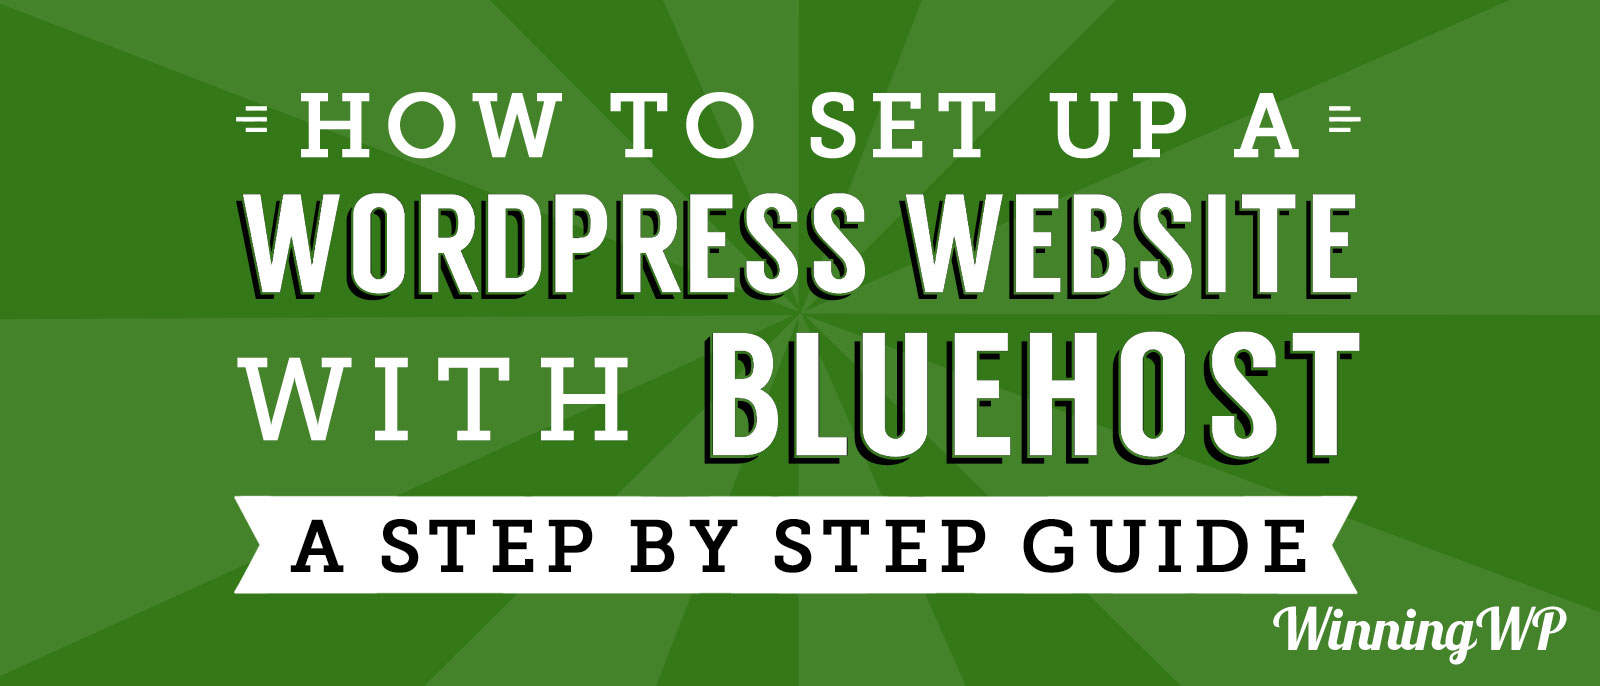 How to make a WordPress website with Bluehost